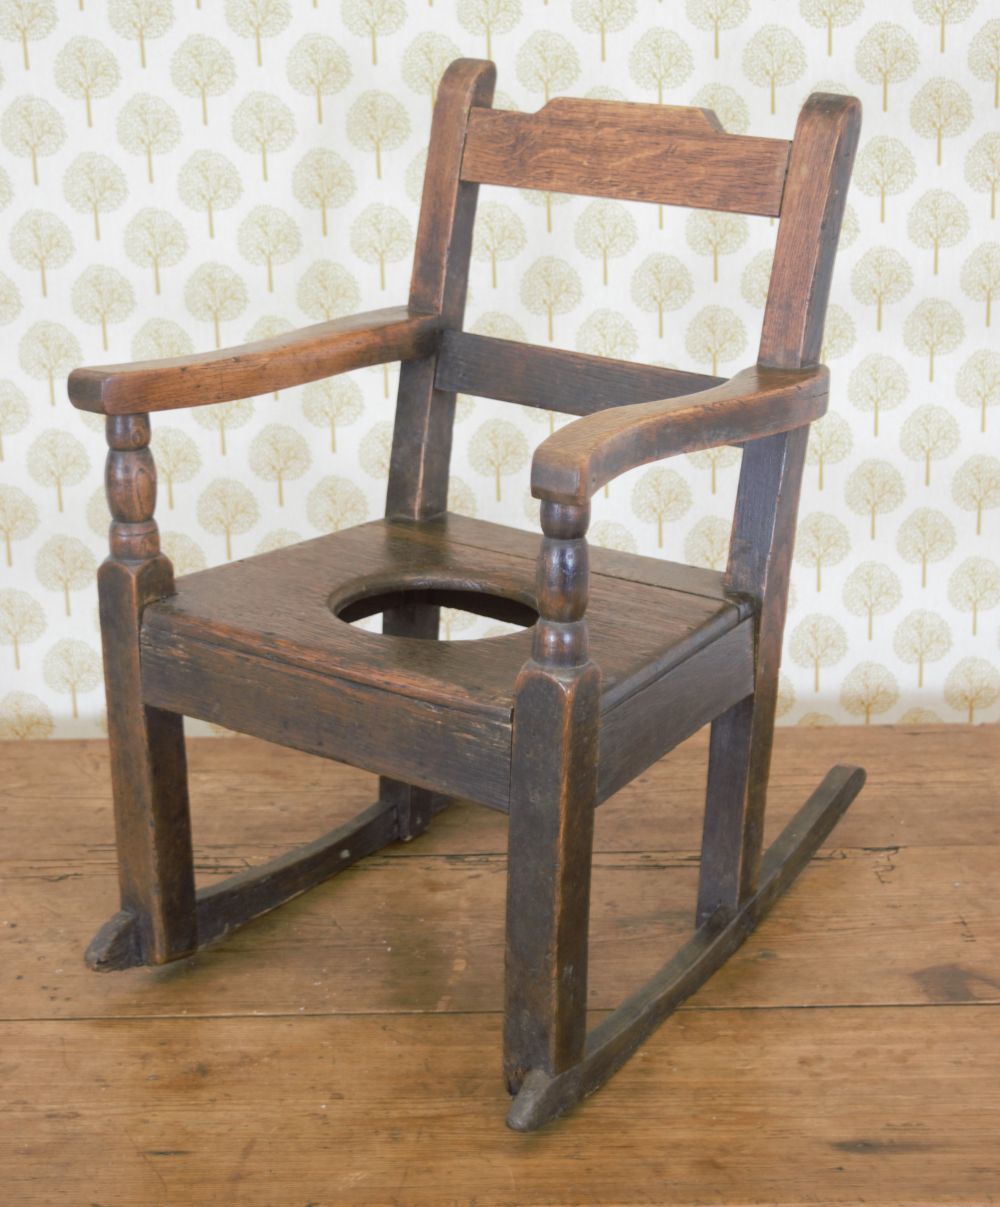 19TH-CENTURY CHILD'S ROCKING CHAIR - Image 2 of 2